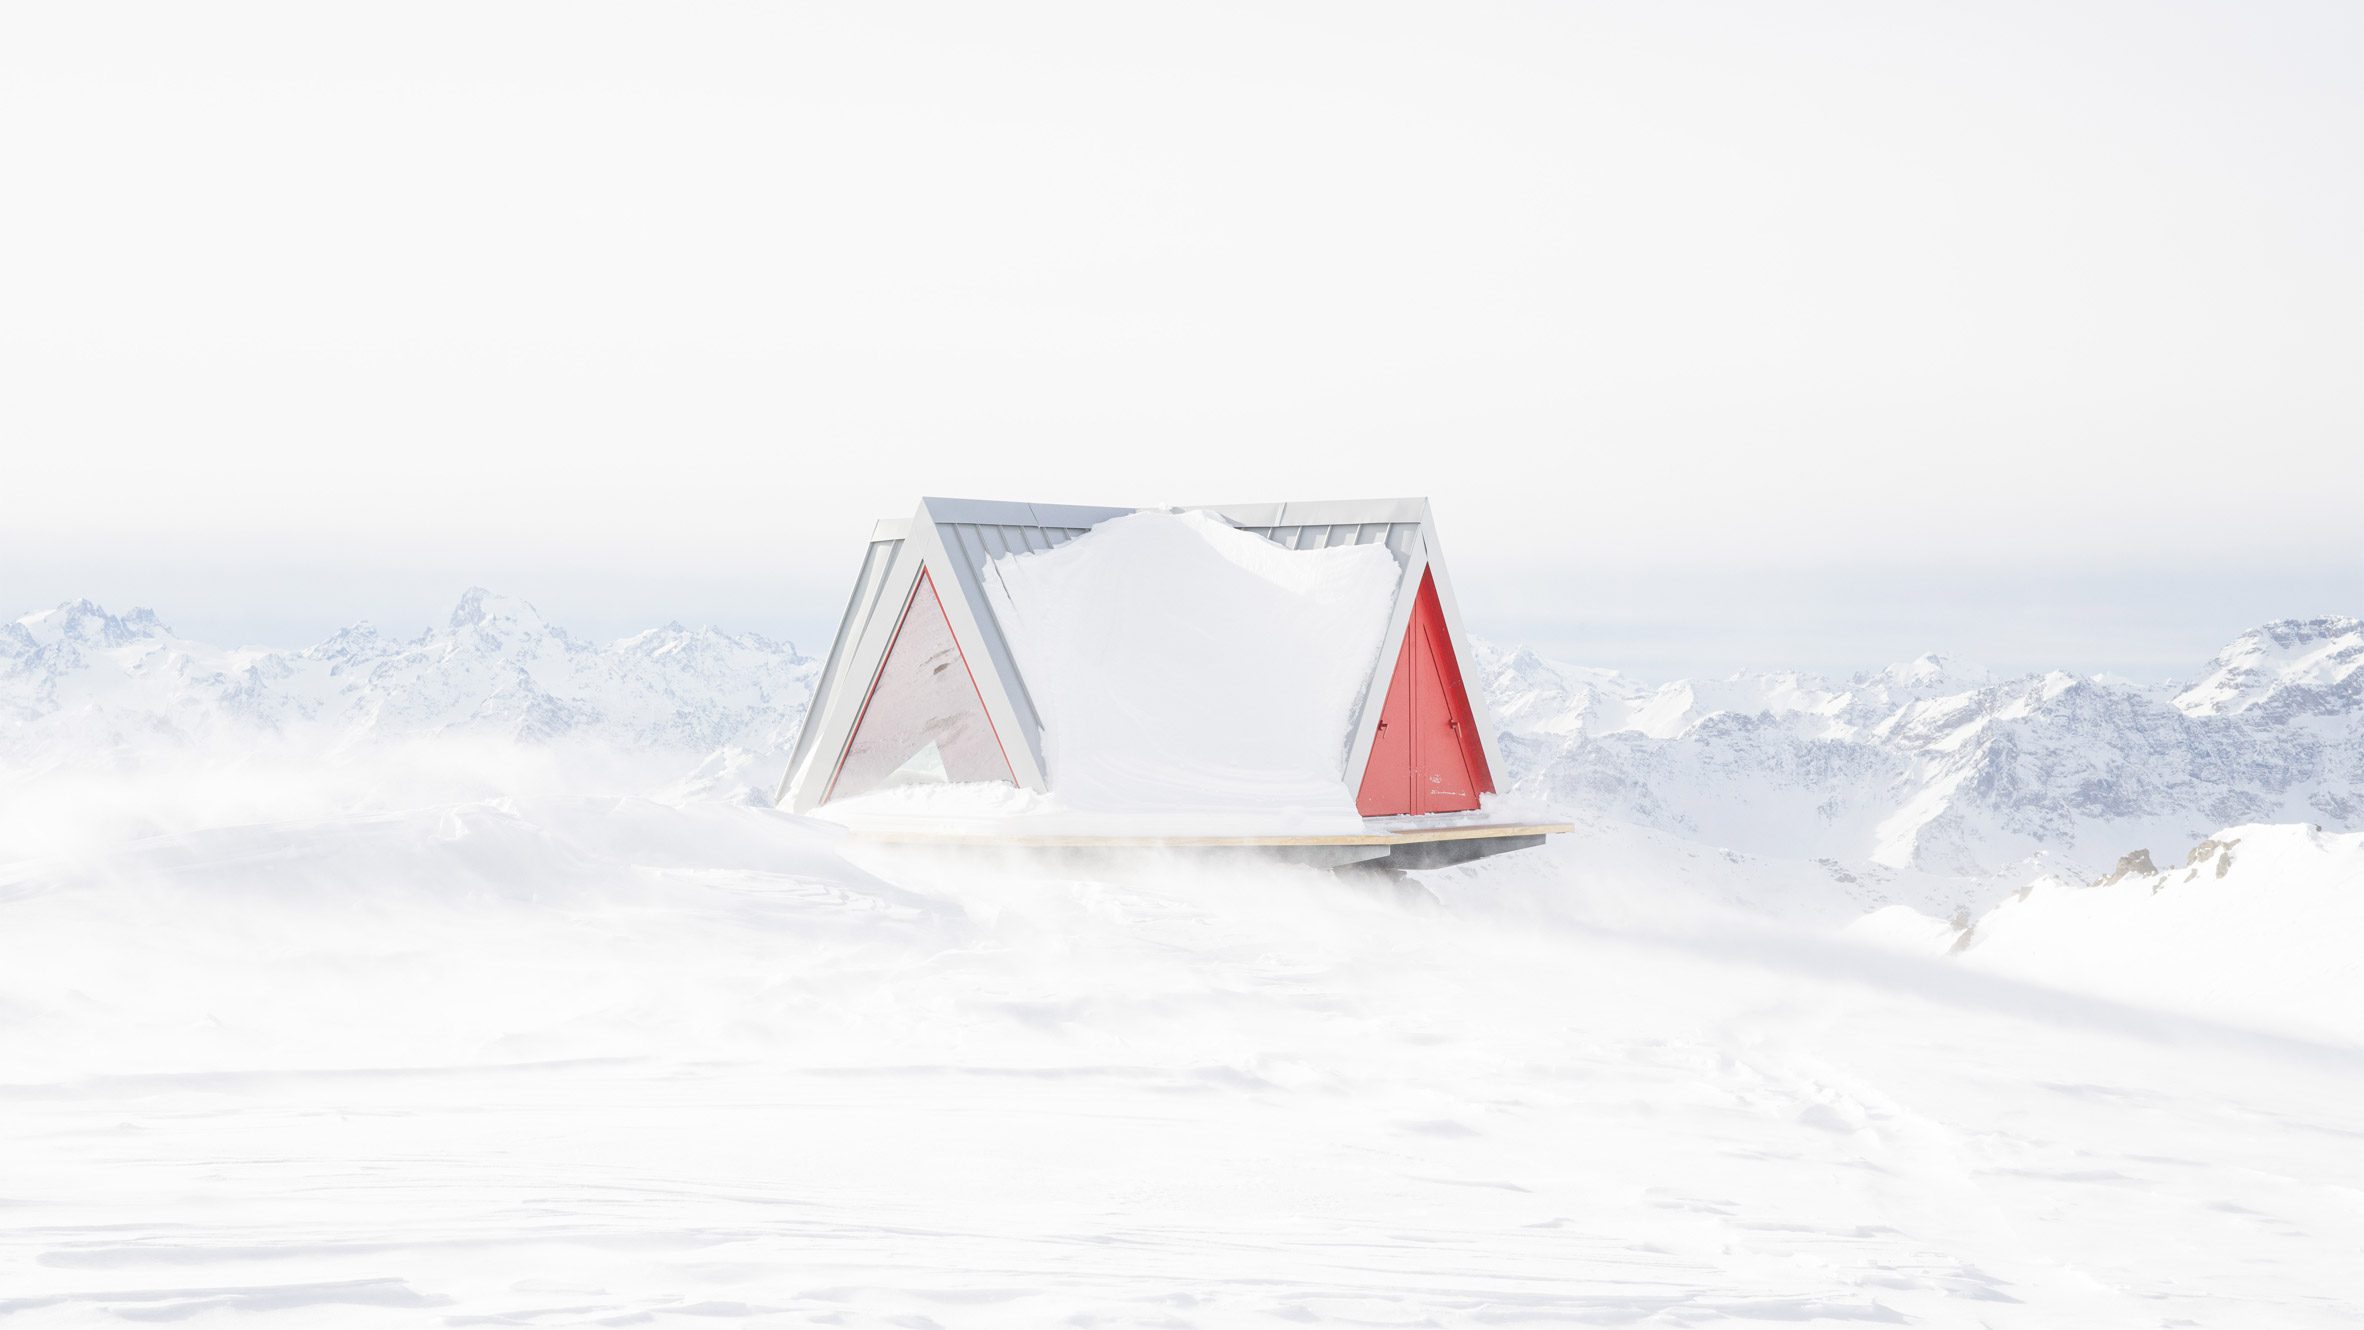 Pinwheel shelter in the Italian Alps by EX